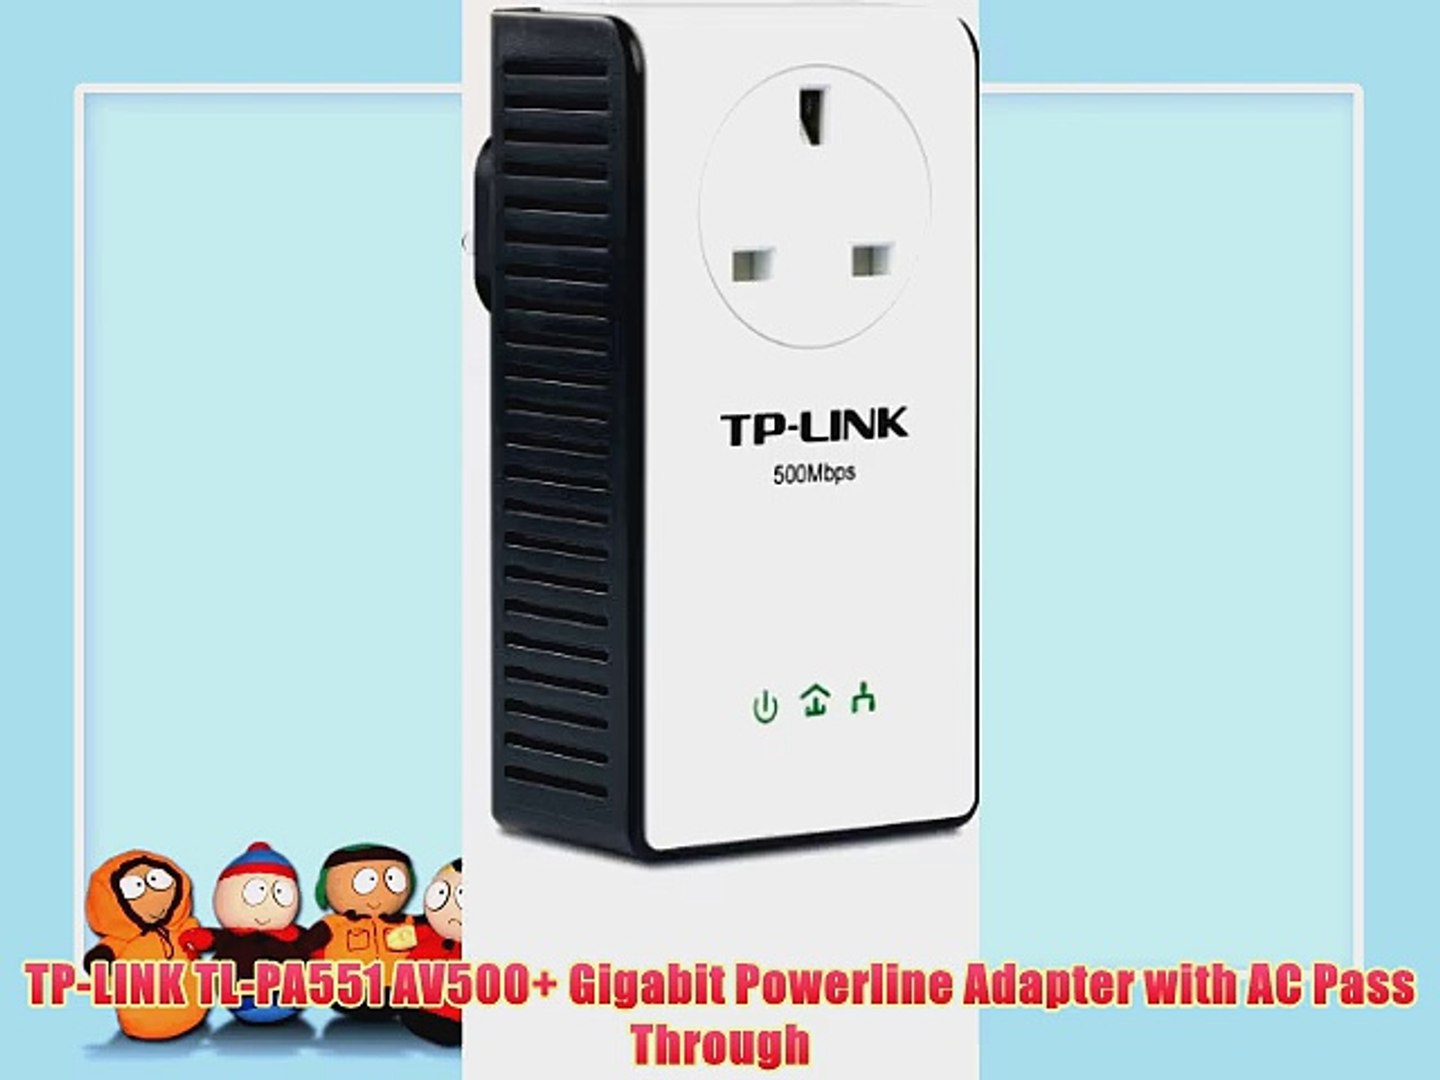 TP-LINK TL-PA551 AV500 Gigabit Powerline Adapter with AC Pass Through -  video Dailymotion